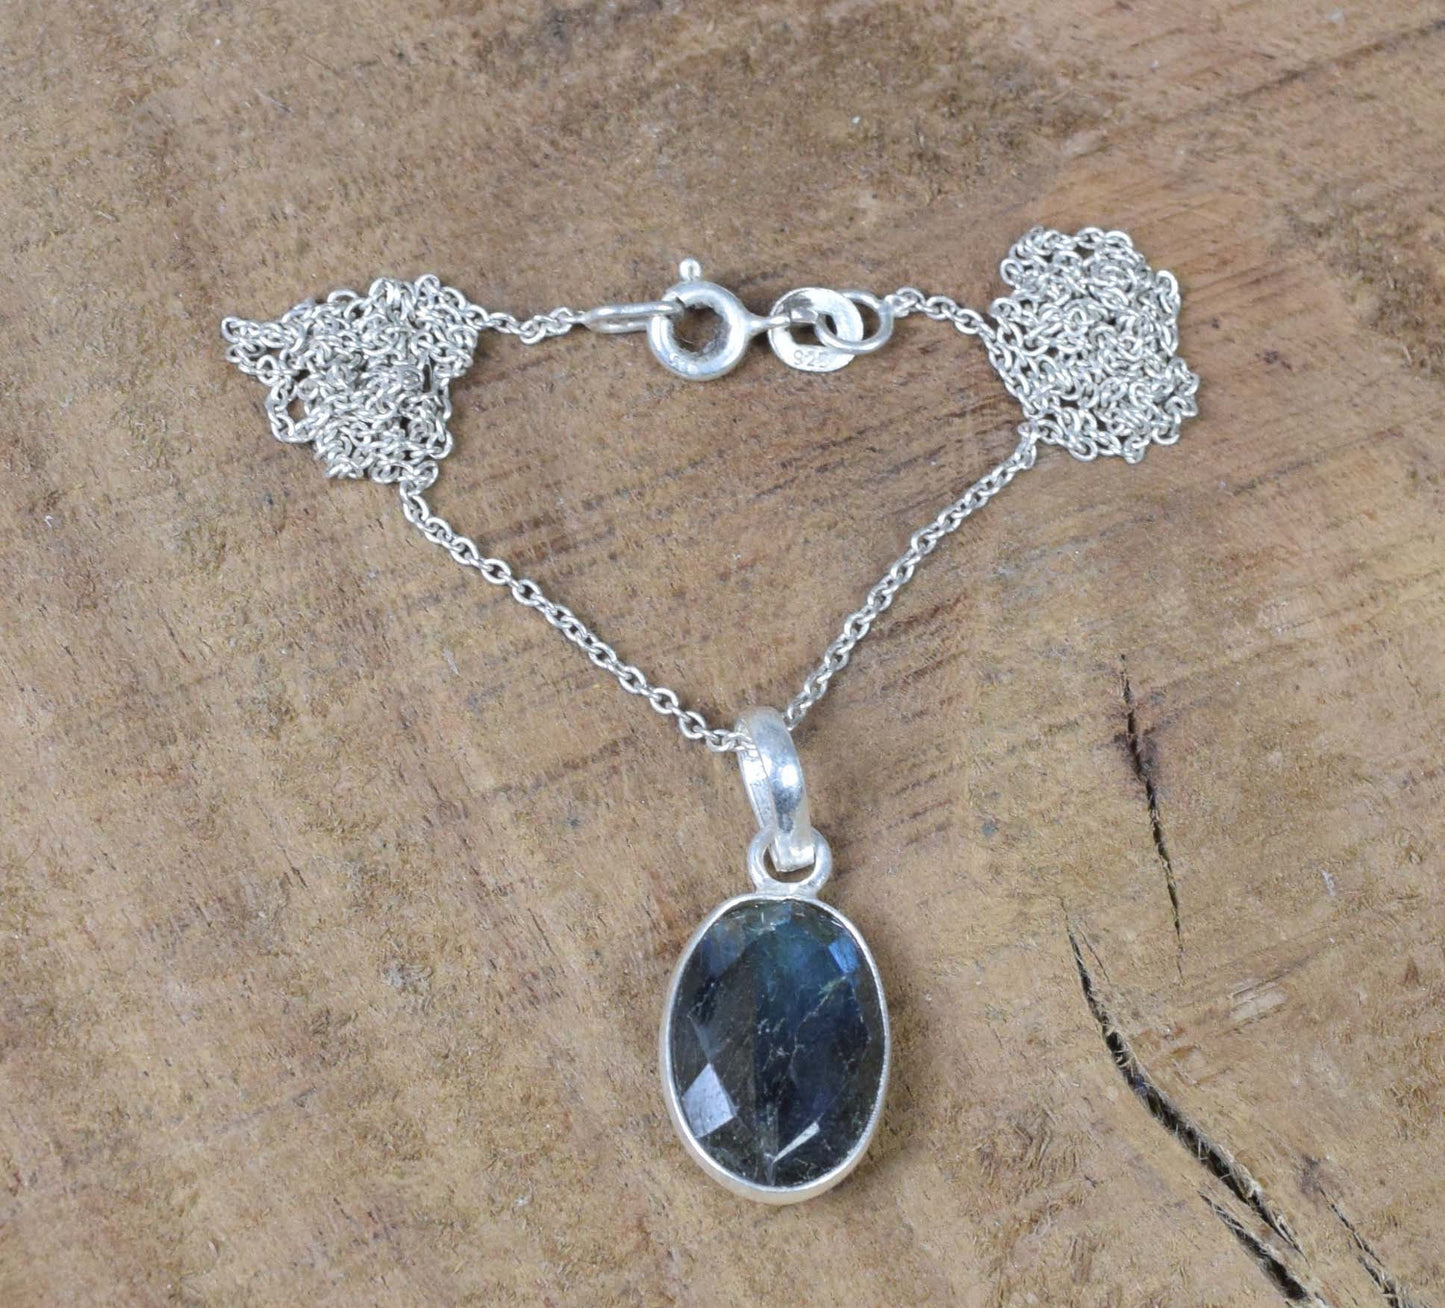 Cut Labradorite 925 Sterling Silver Oval Gemstone Jewelry Chain Pendant w/ or w/o chain ~ Natural Labradorite Necklace ~Gift For Anniversary